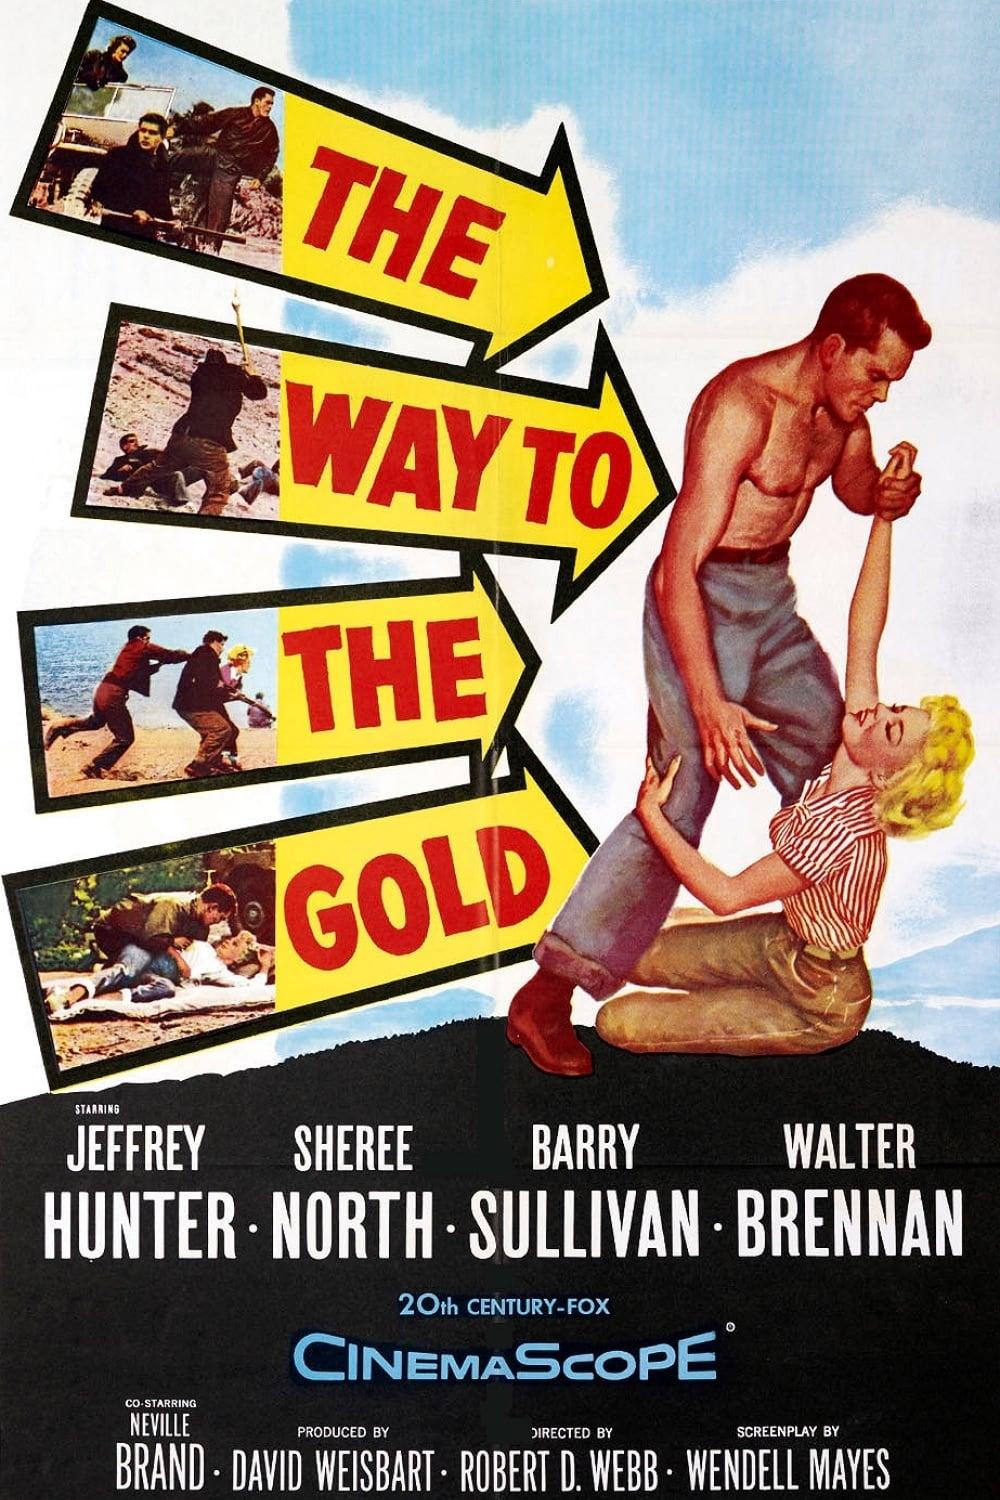 The Way to the Gold poster